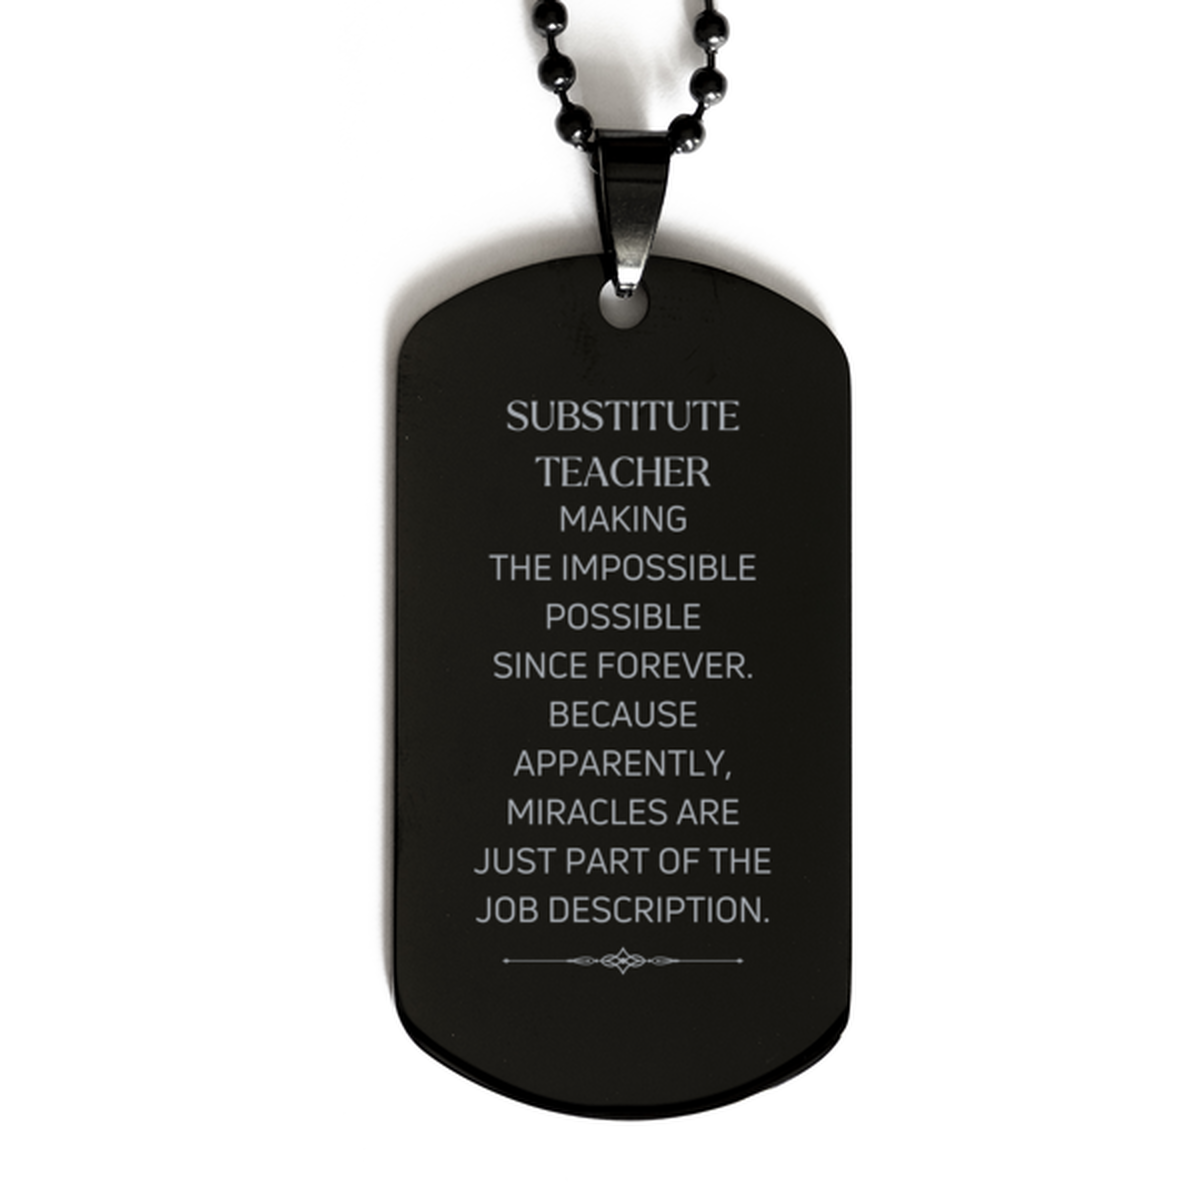 Funny Substitute Teacher Gifts, Miracles are just part of the job description, Inspirational Birthday Black Dog Tag For Substitute Teacher, Men, Women, Coworkers, Friends, Boss